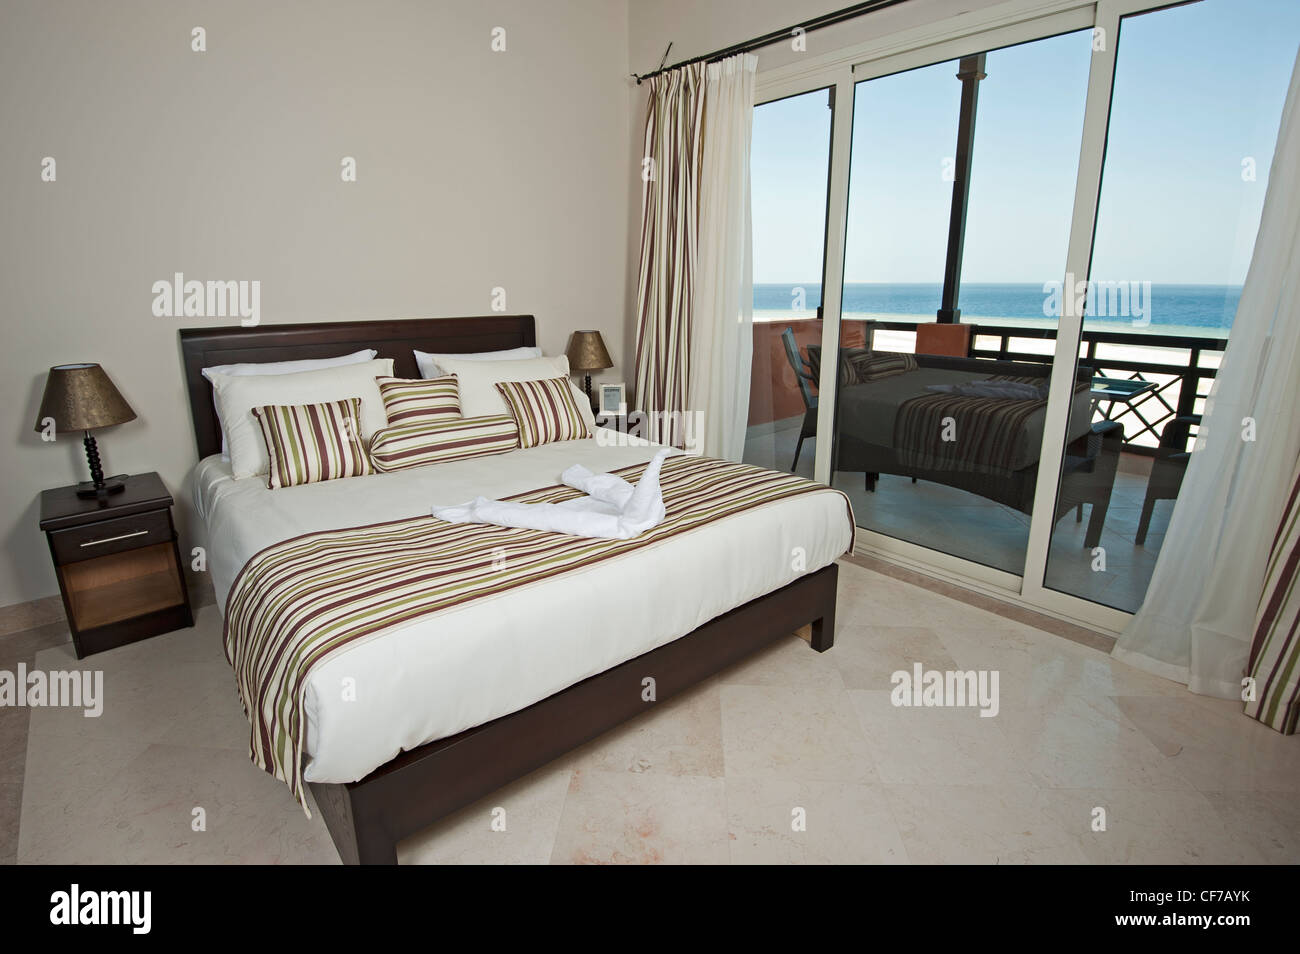 Bedroom on a luxury apartment with a tropical sea view Stock Photo